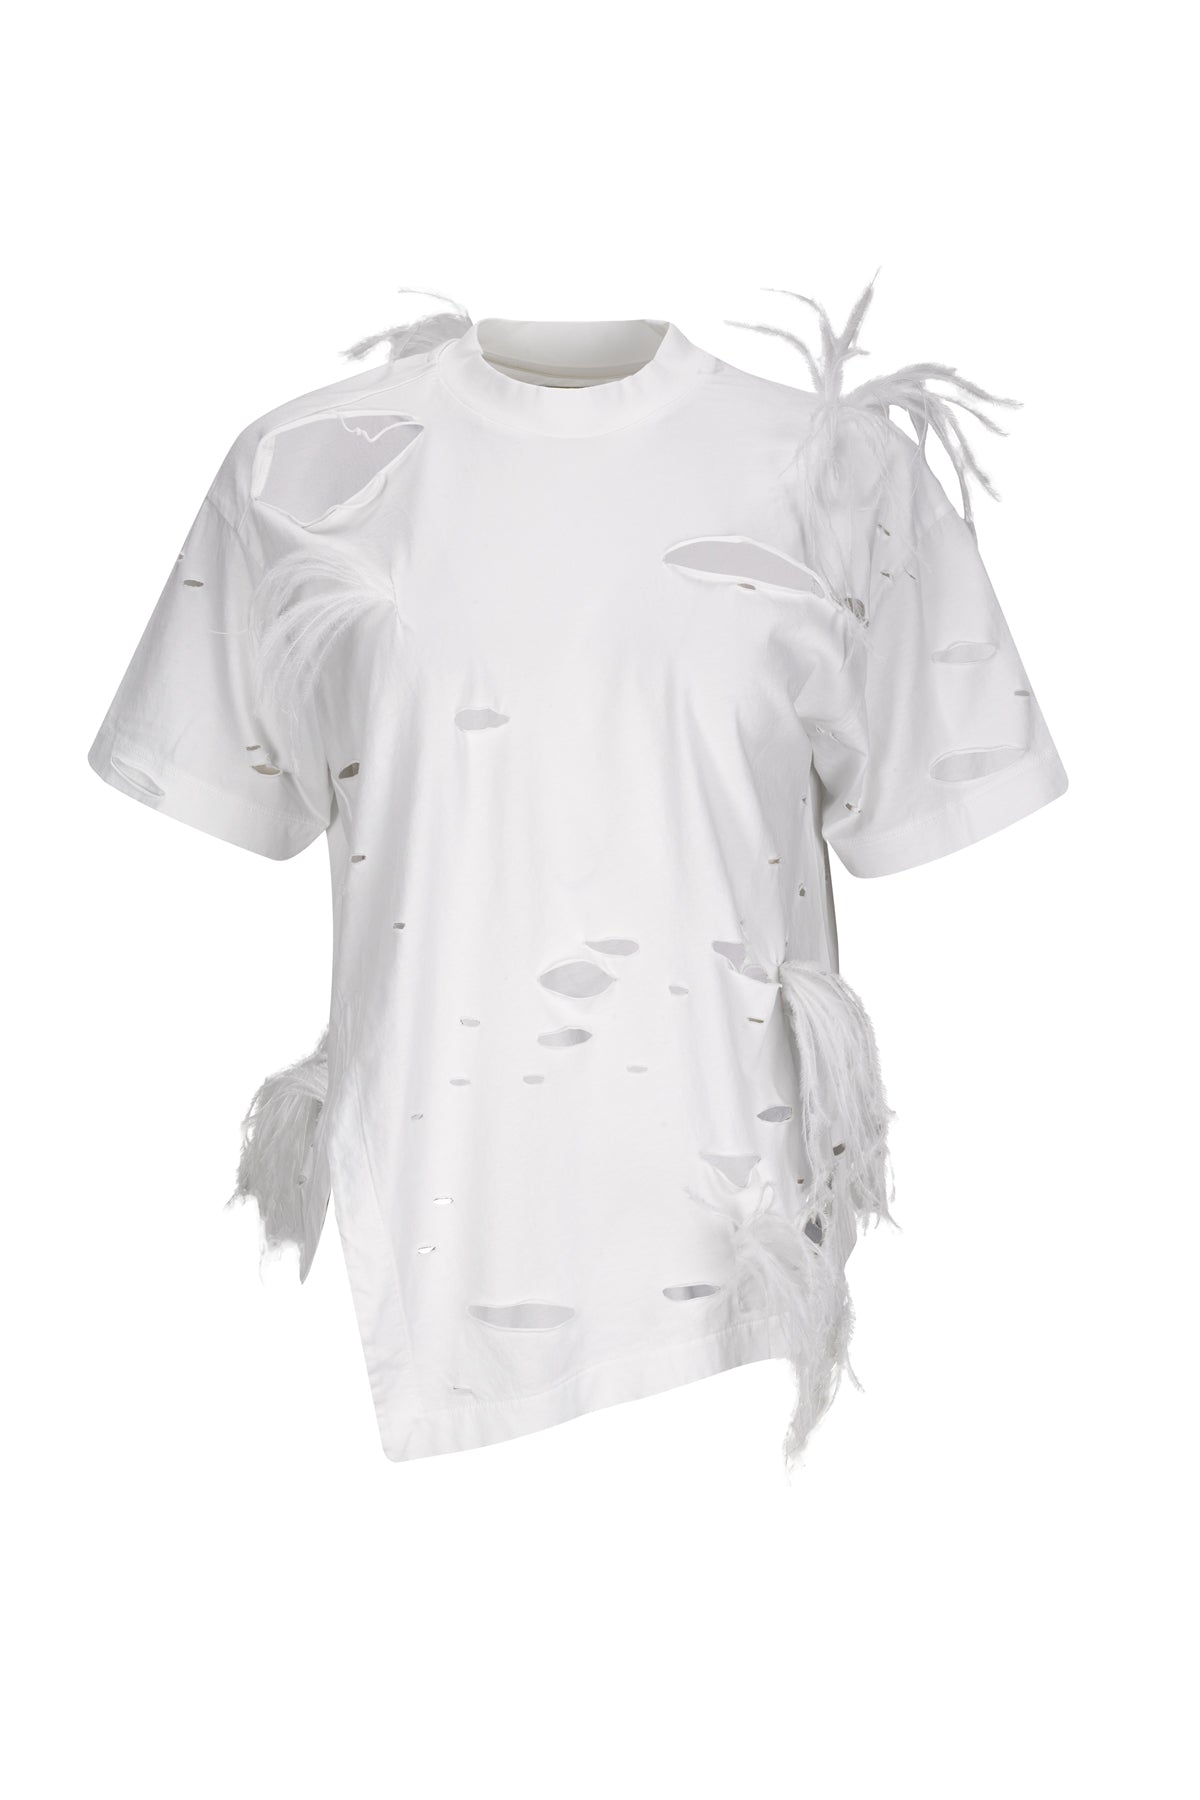 WHITE DISTRESSED T-SHIRT WITH FEATHERS